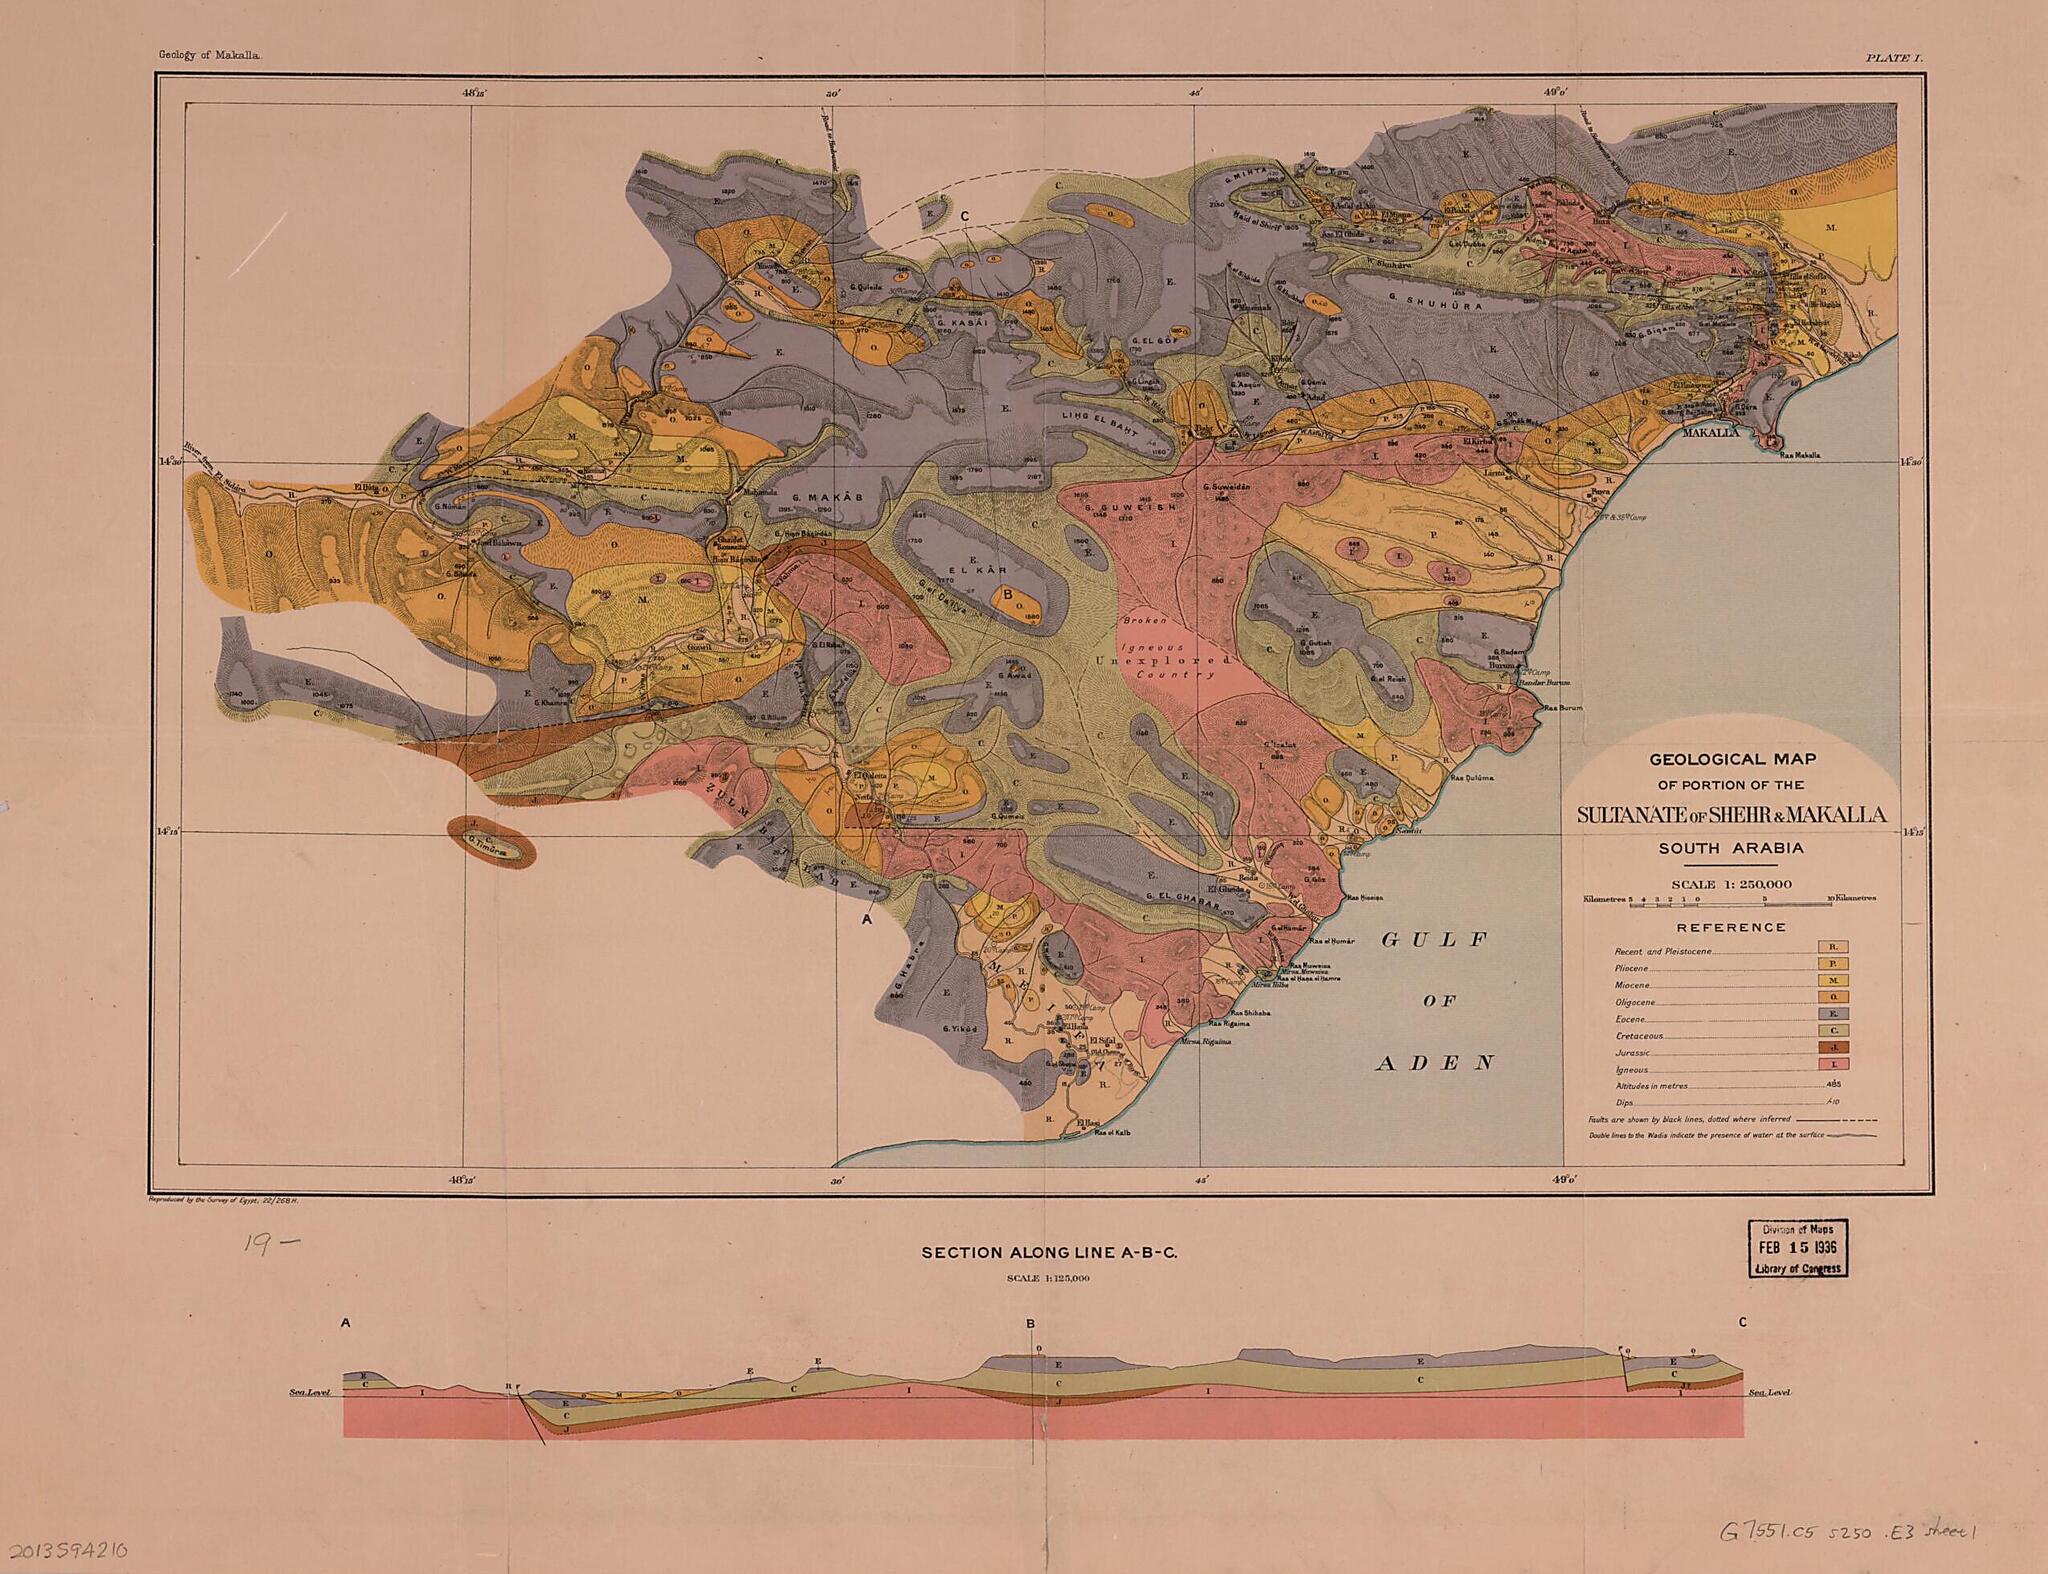 This old map of Geological Map of Portion of the Sultanate of Shehr &amp; Makalla, South Arabia. (Geology of Makalla) from 1922 was created by  Misāḥah, O. H. (Otway Henry) Little in 1922